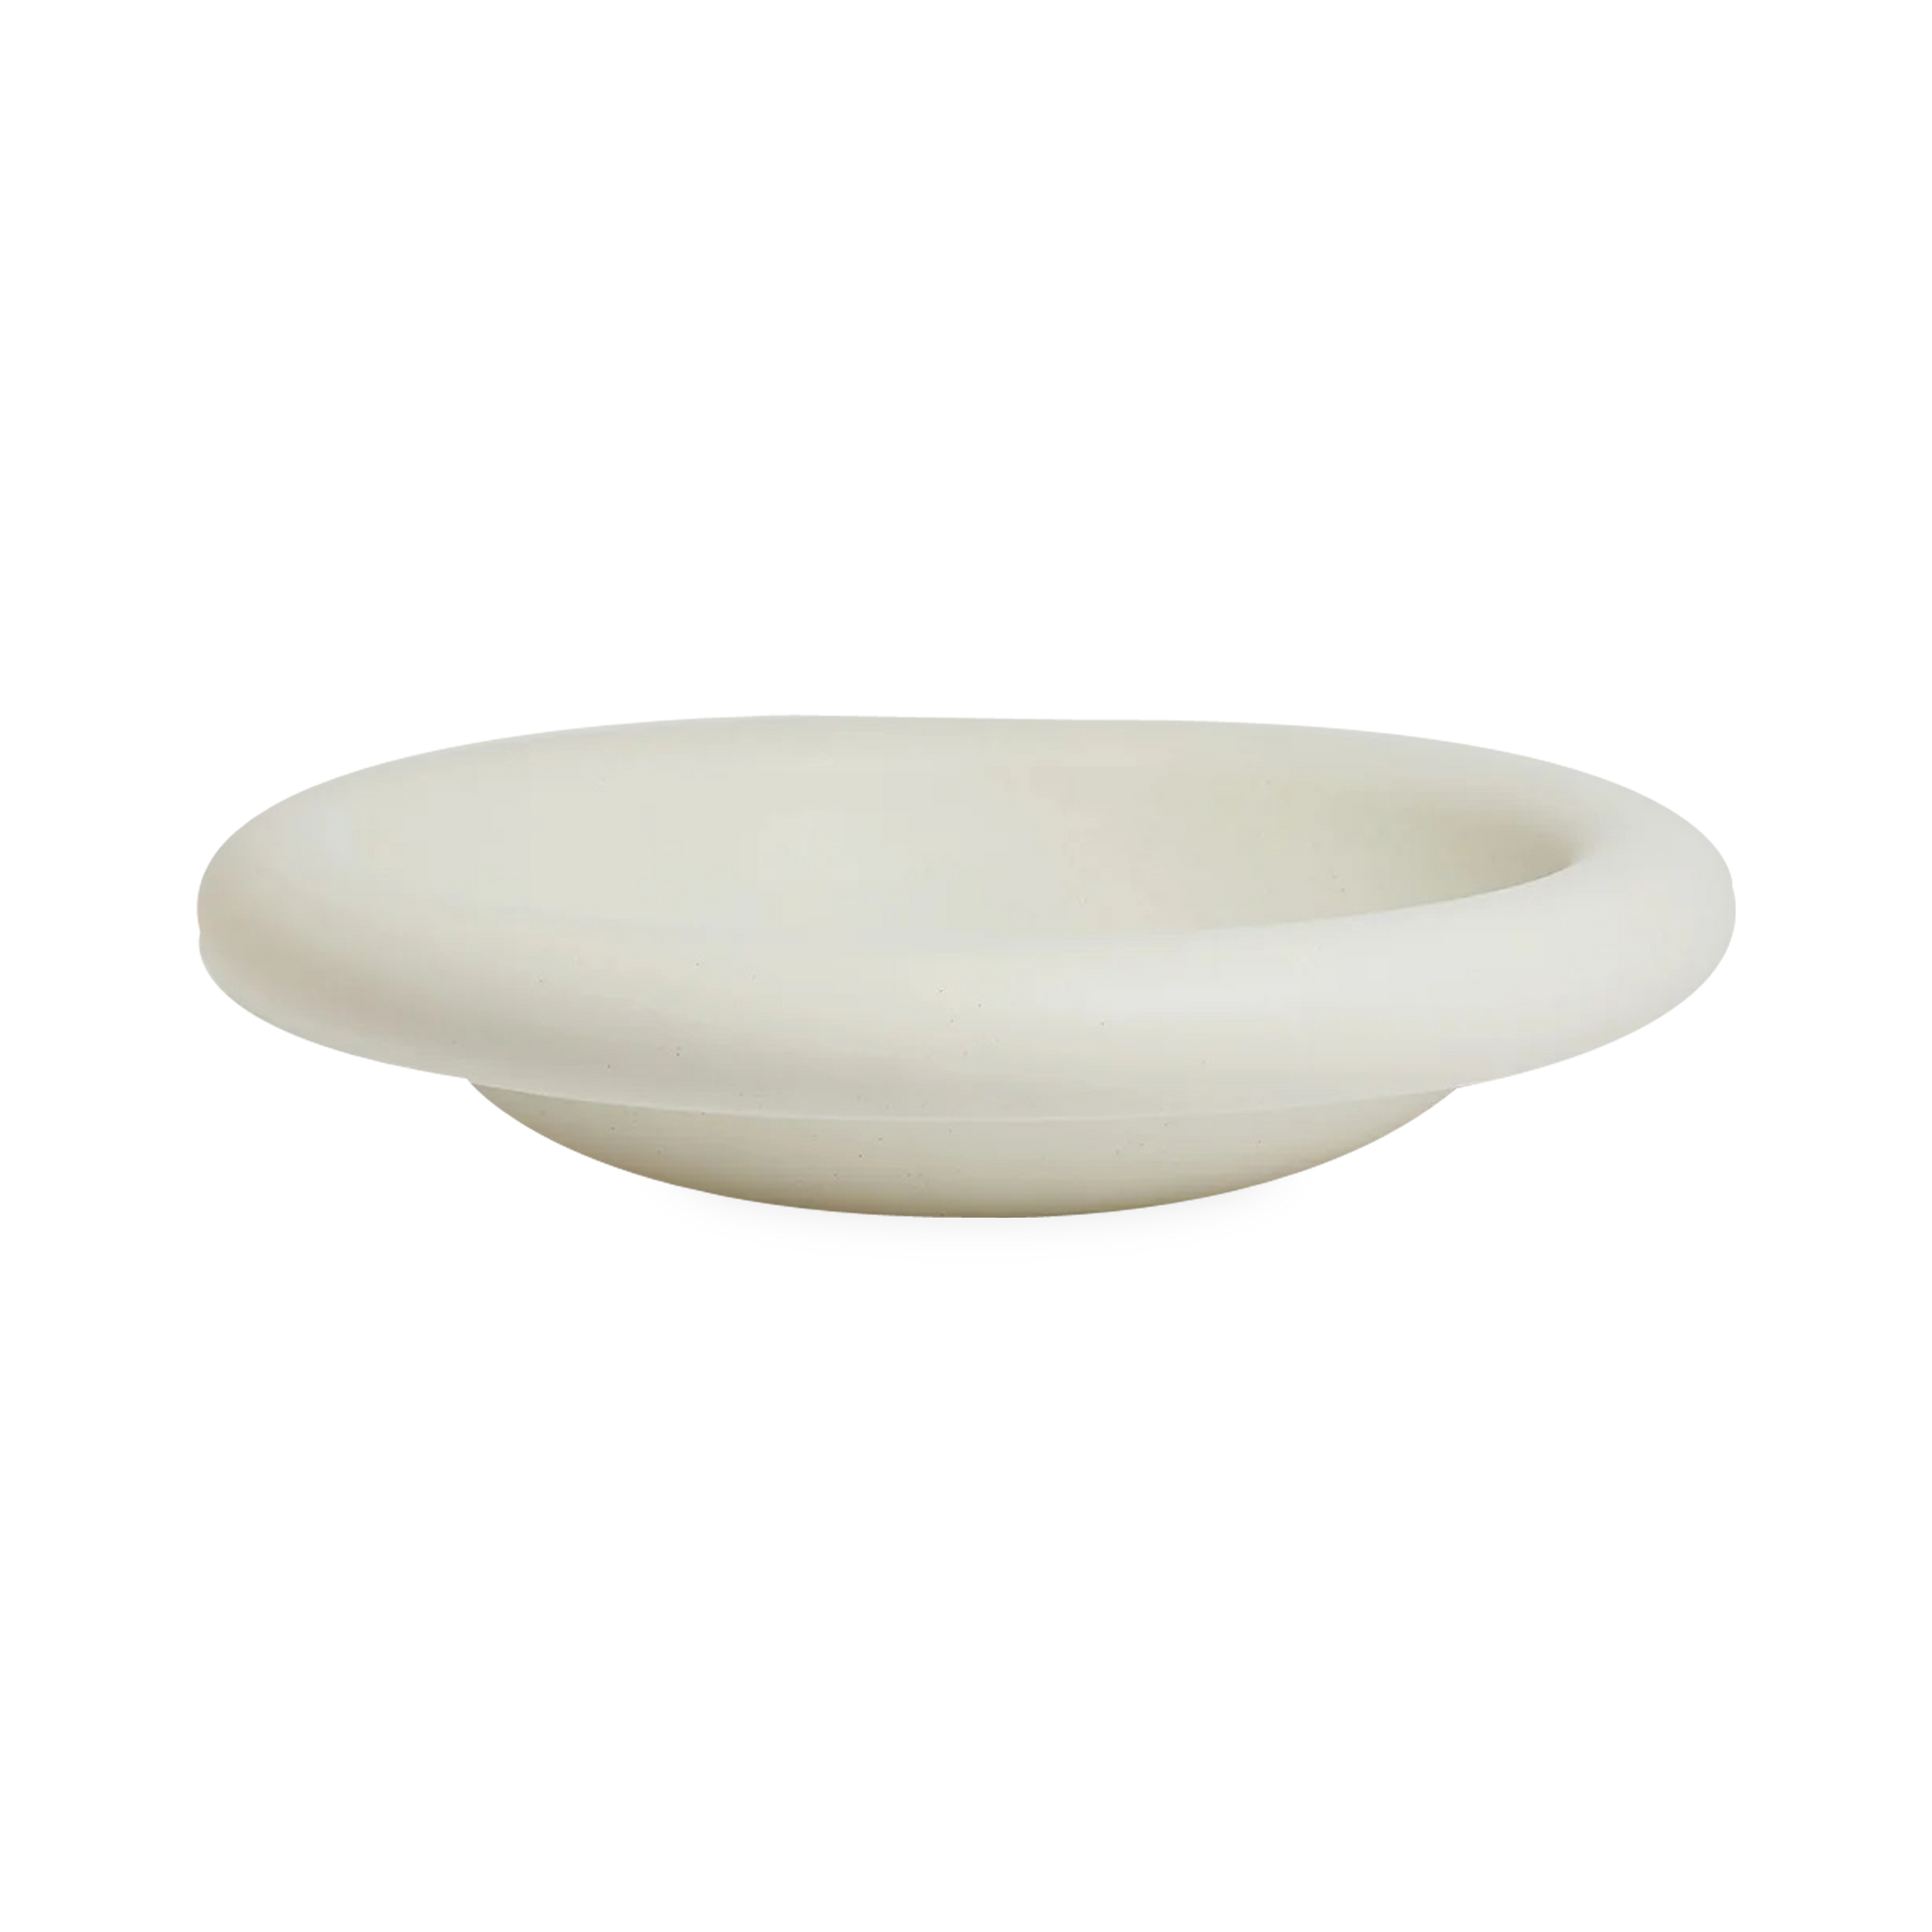 Evoking the simplicity of the potter's wheel, this refined stoneware dish is distinguished by the gentle yet unique swell of its rim.